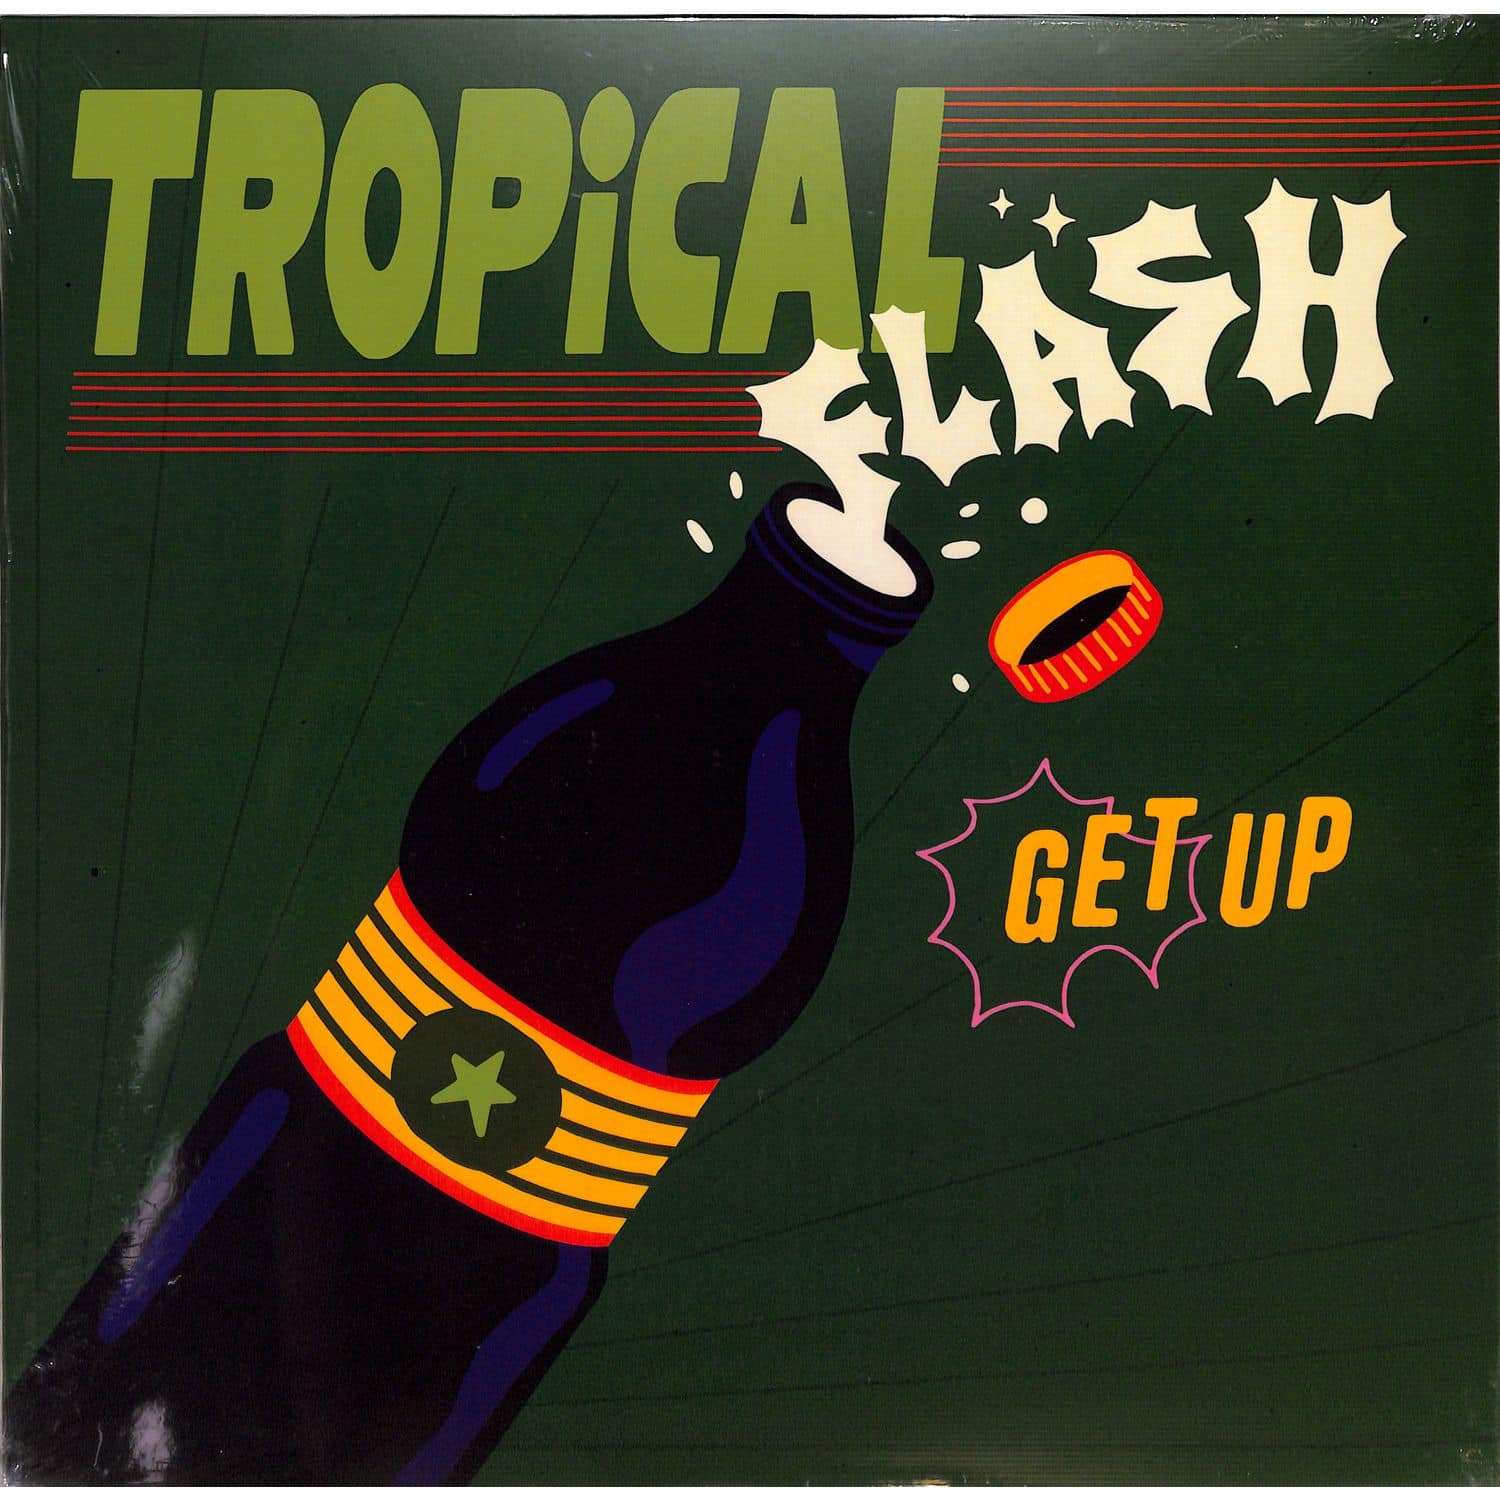 Tropical Flash - GET UP